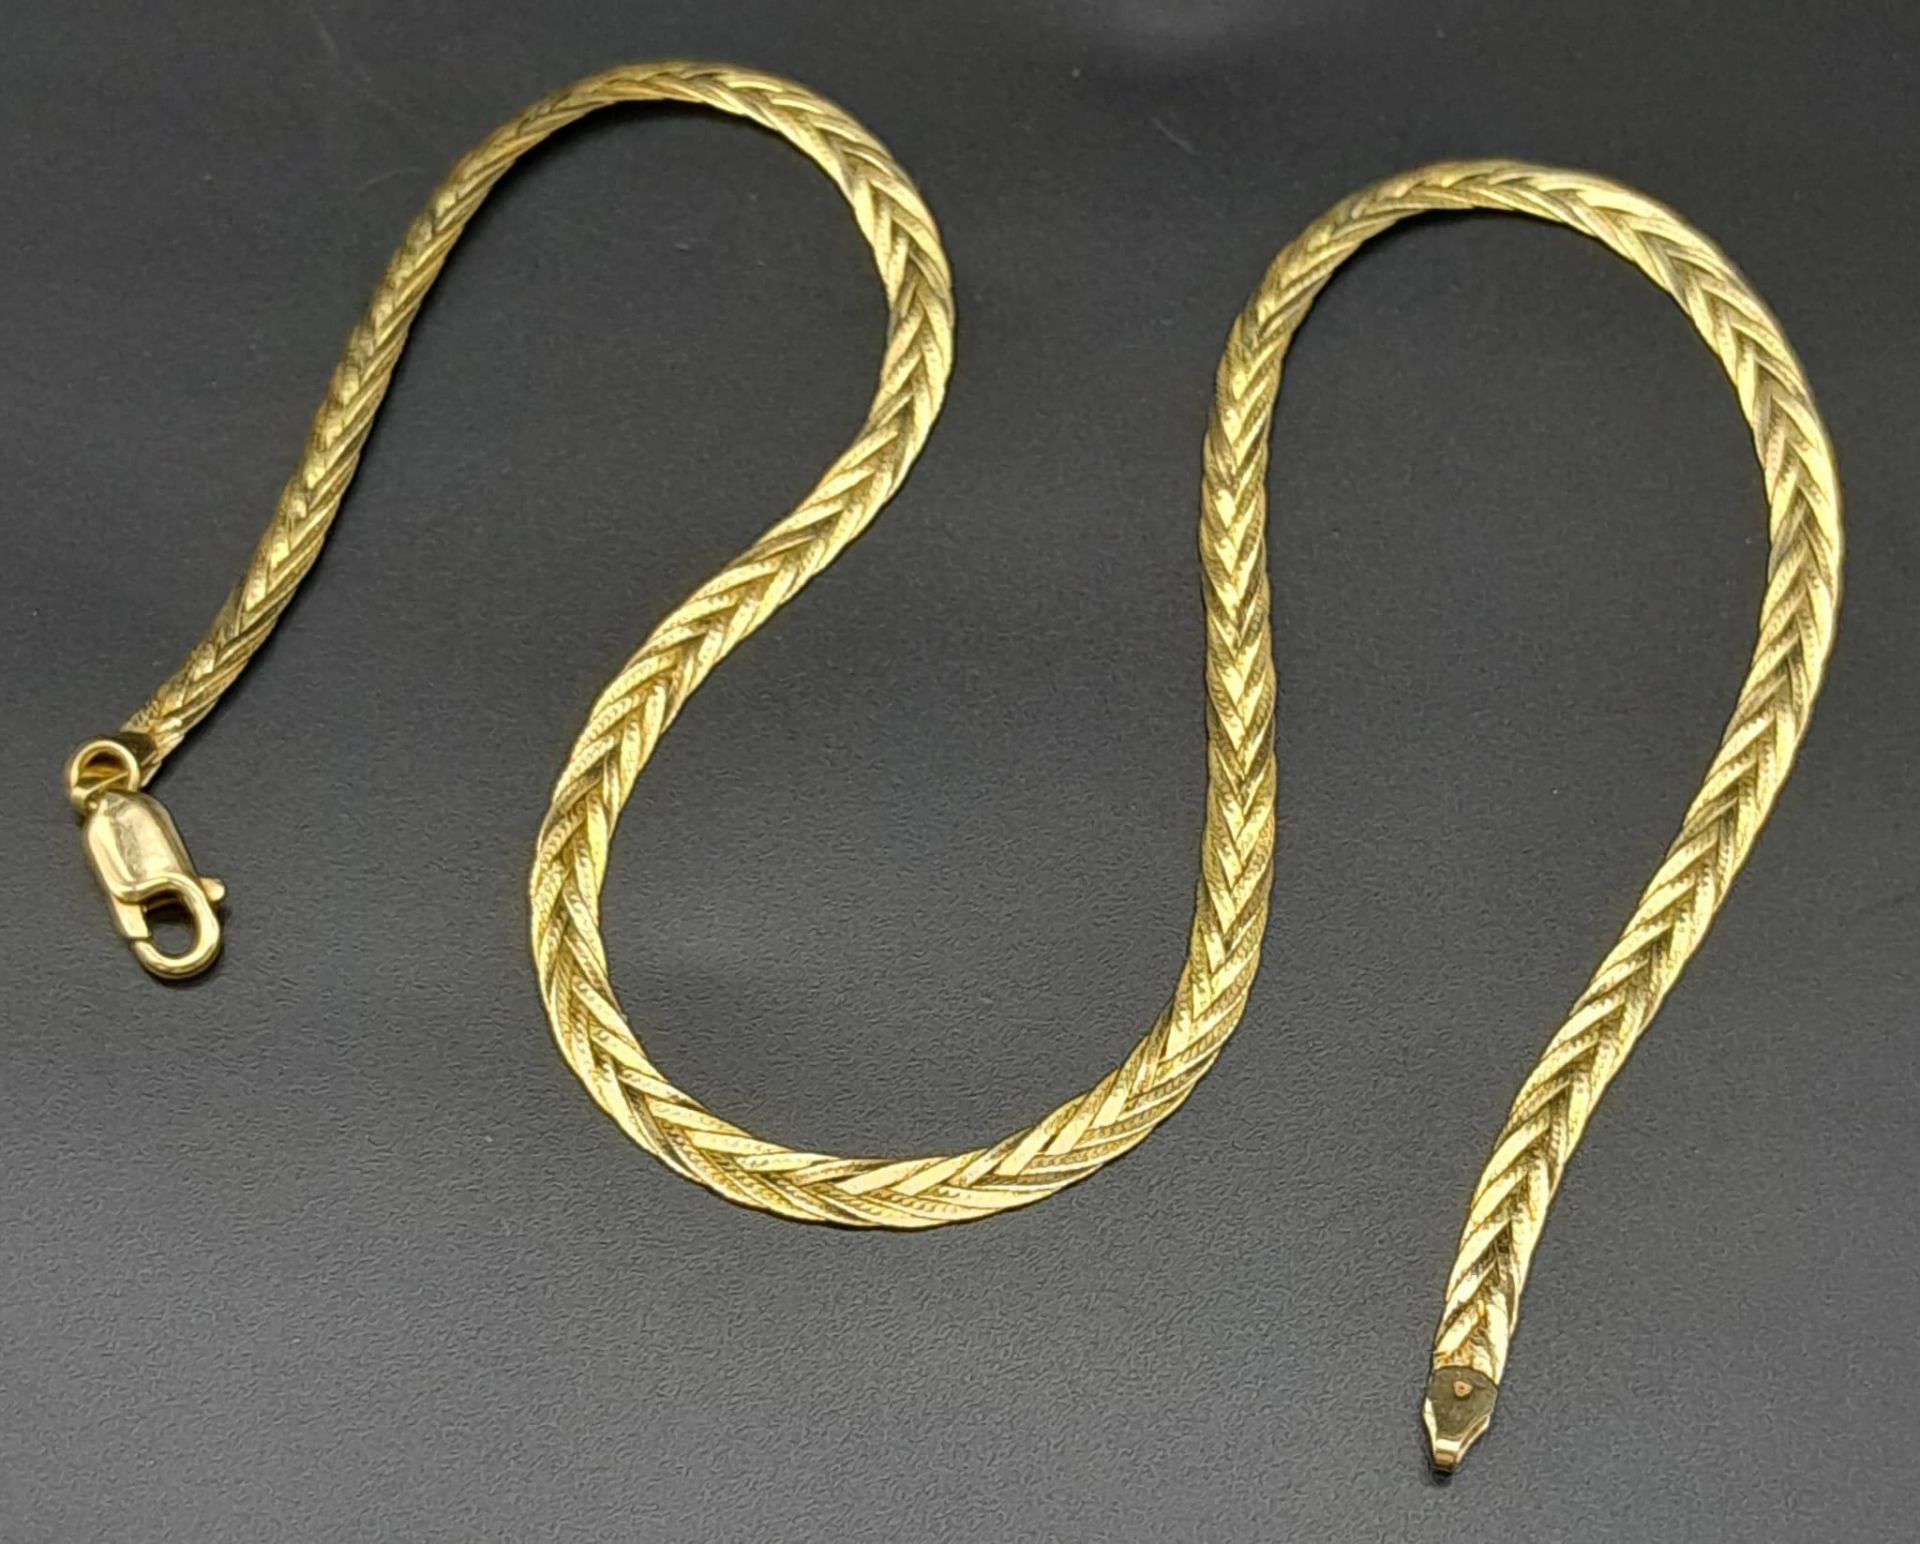 A Vintage 9K Yellow Gold Woven Link Necklace. 40cm. 7.5g weight. - Image 2 of 5